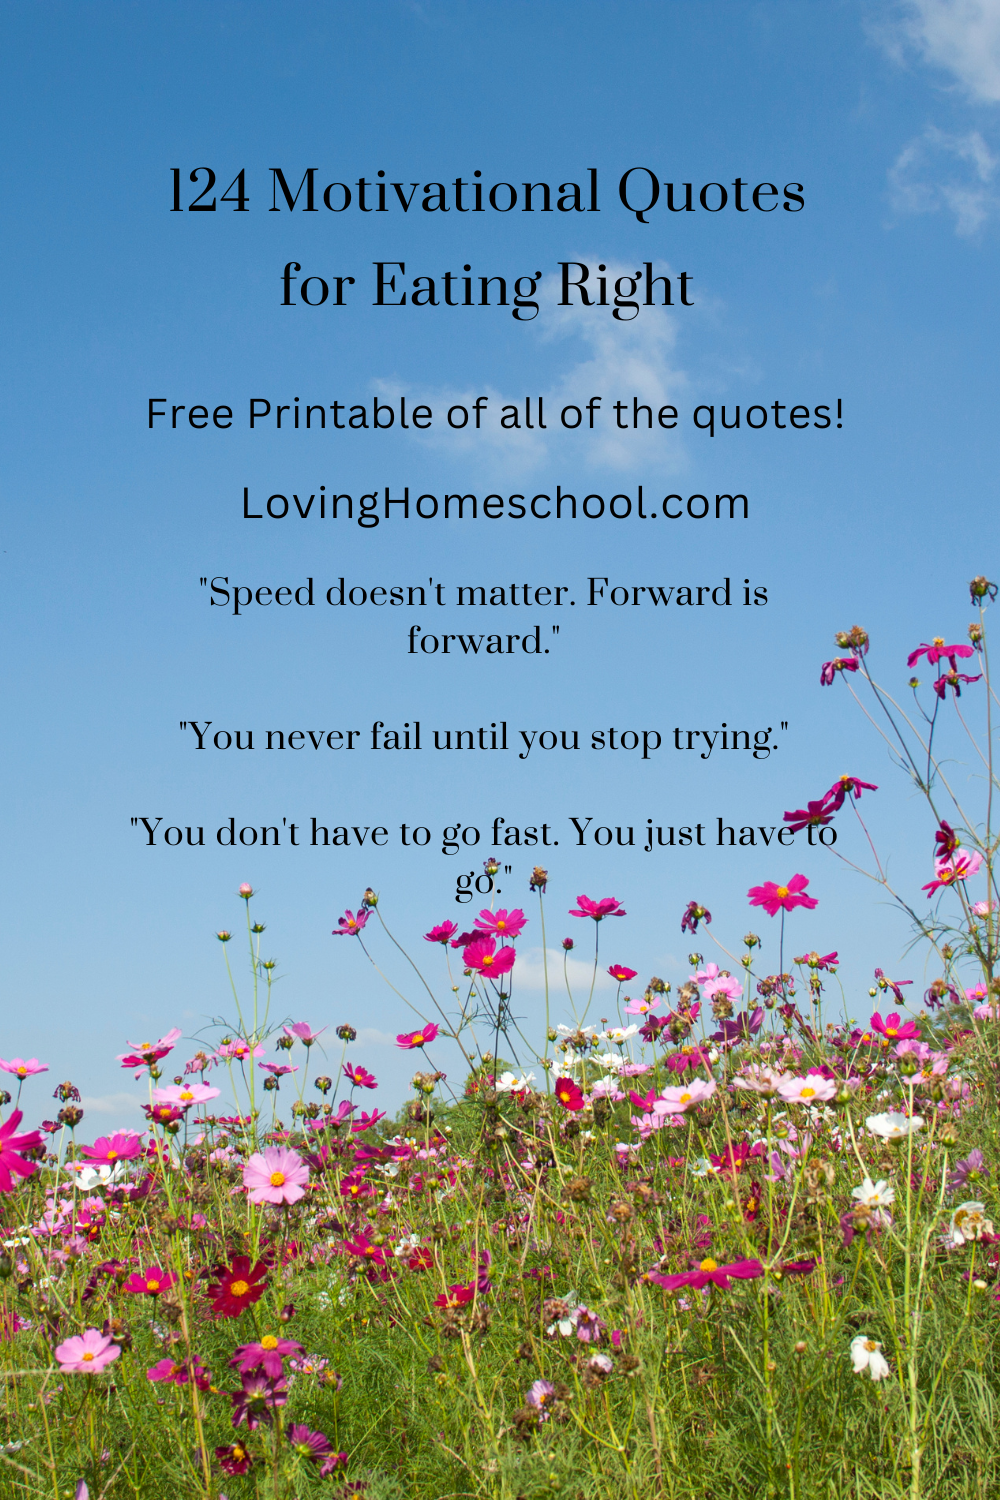 124 Motivational Quotes for Eating Right Pinterest pin